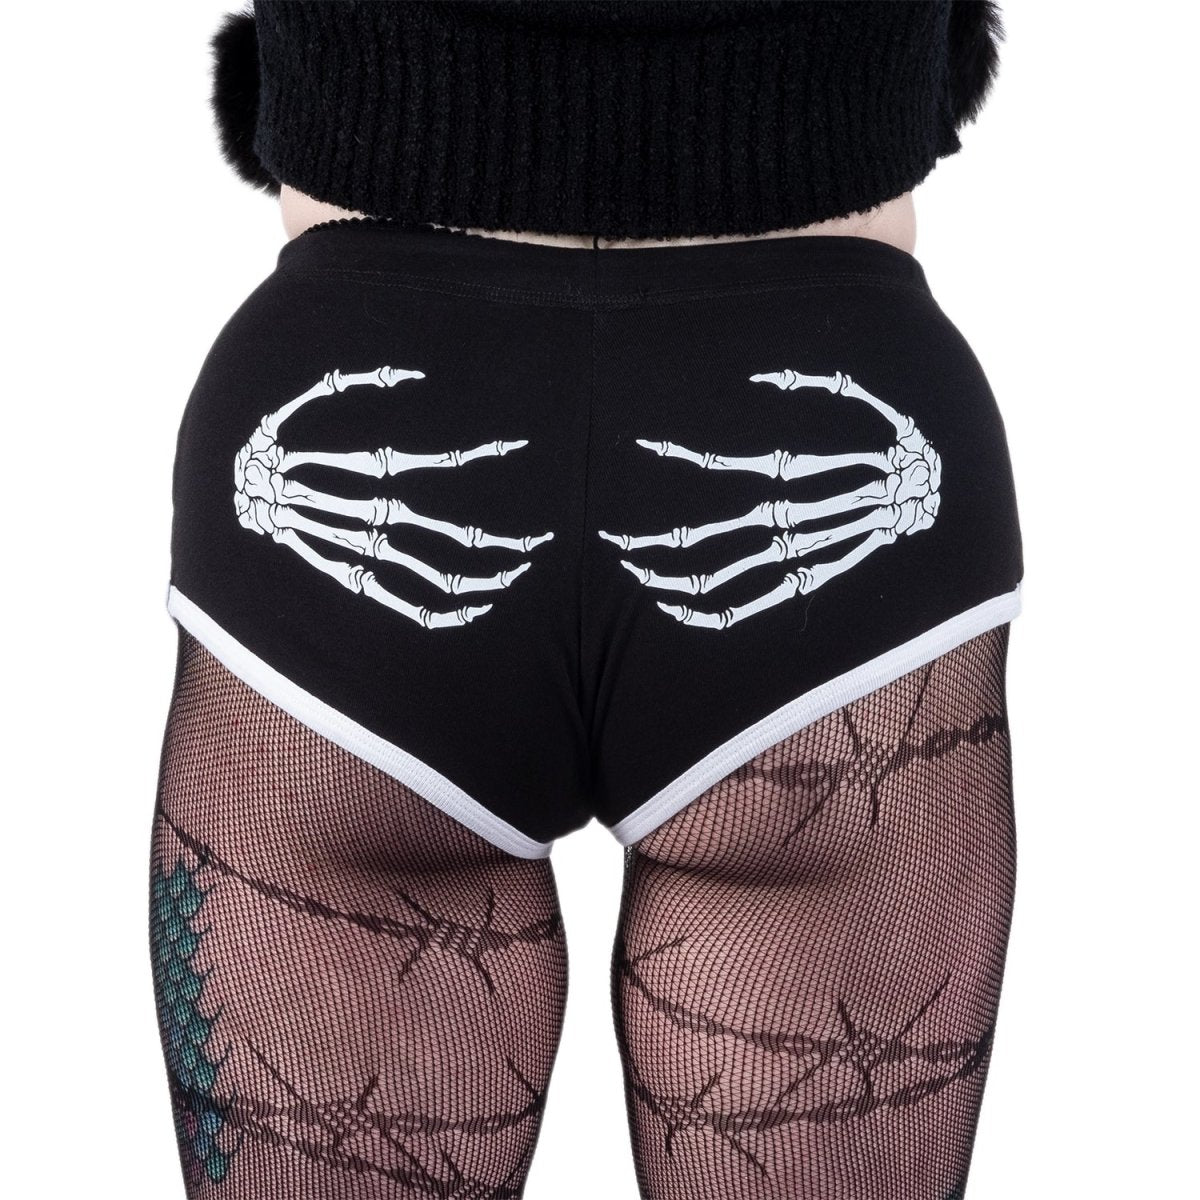 Too Fast | Skeleton Hands Black Dolphin Shorts